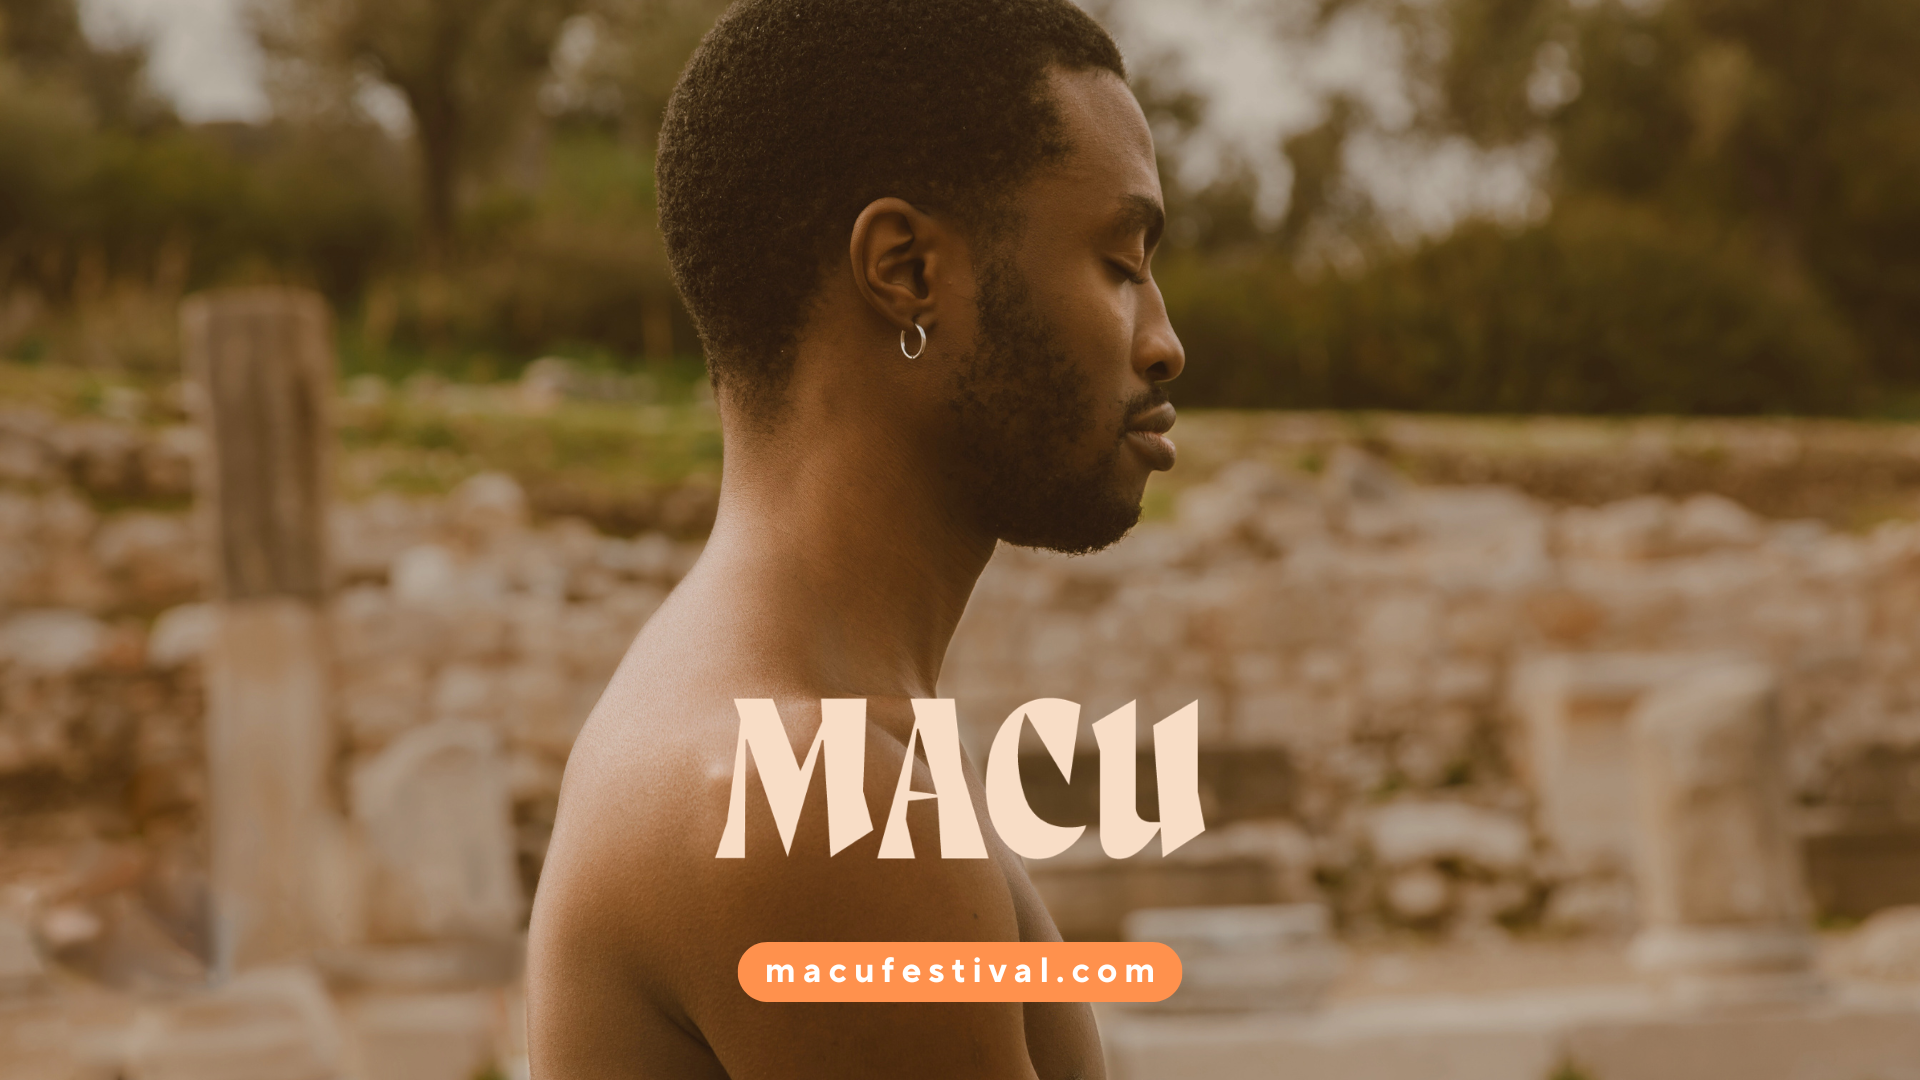 Macu Mindfulness event for music lovers